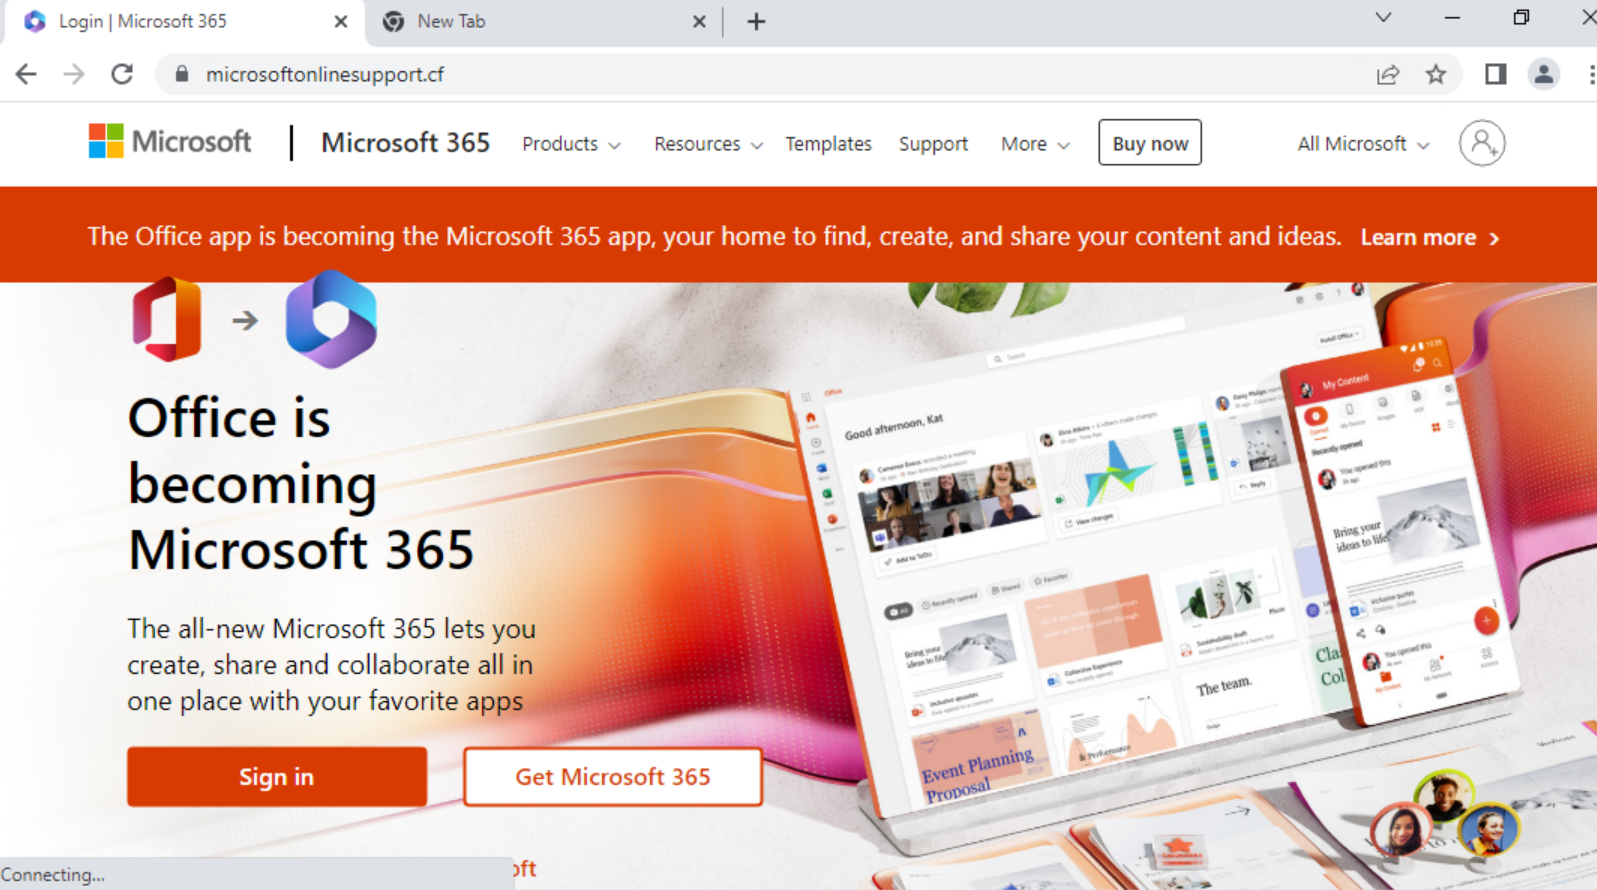 Image 9 is a screenshot of a phishing URL that targets Microsoft's online support page.